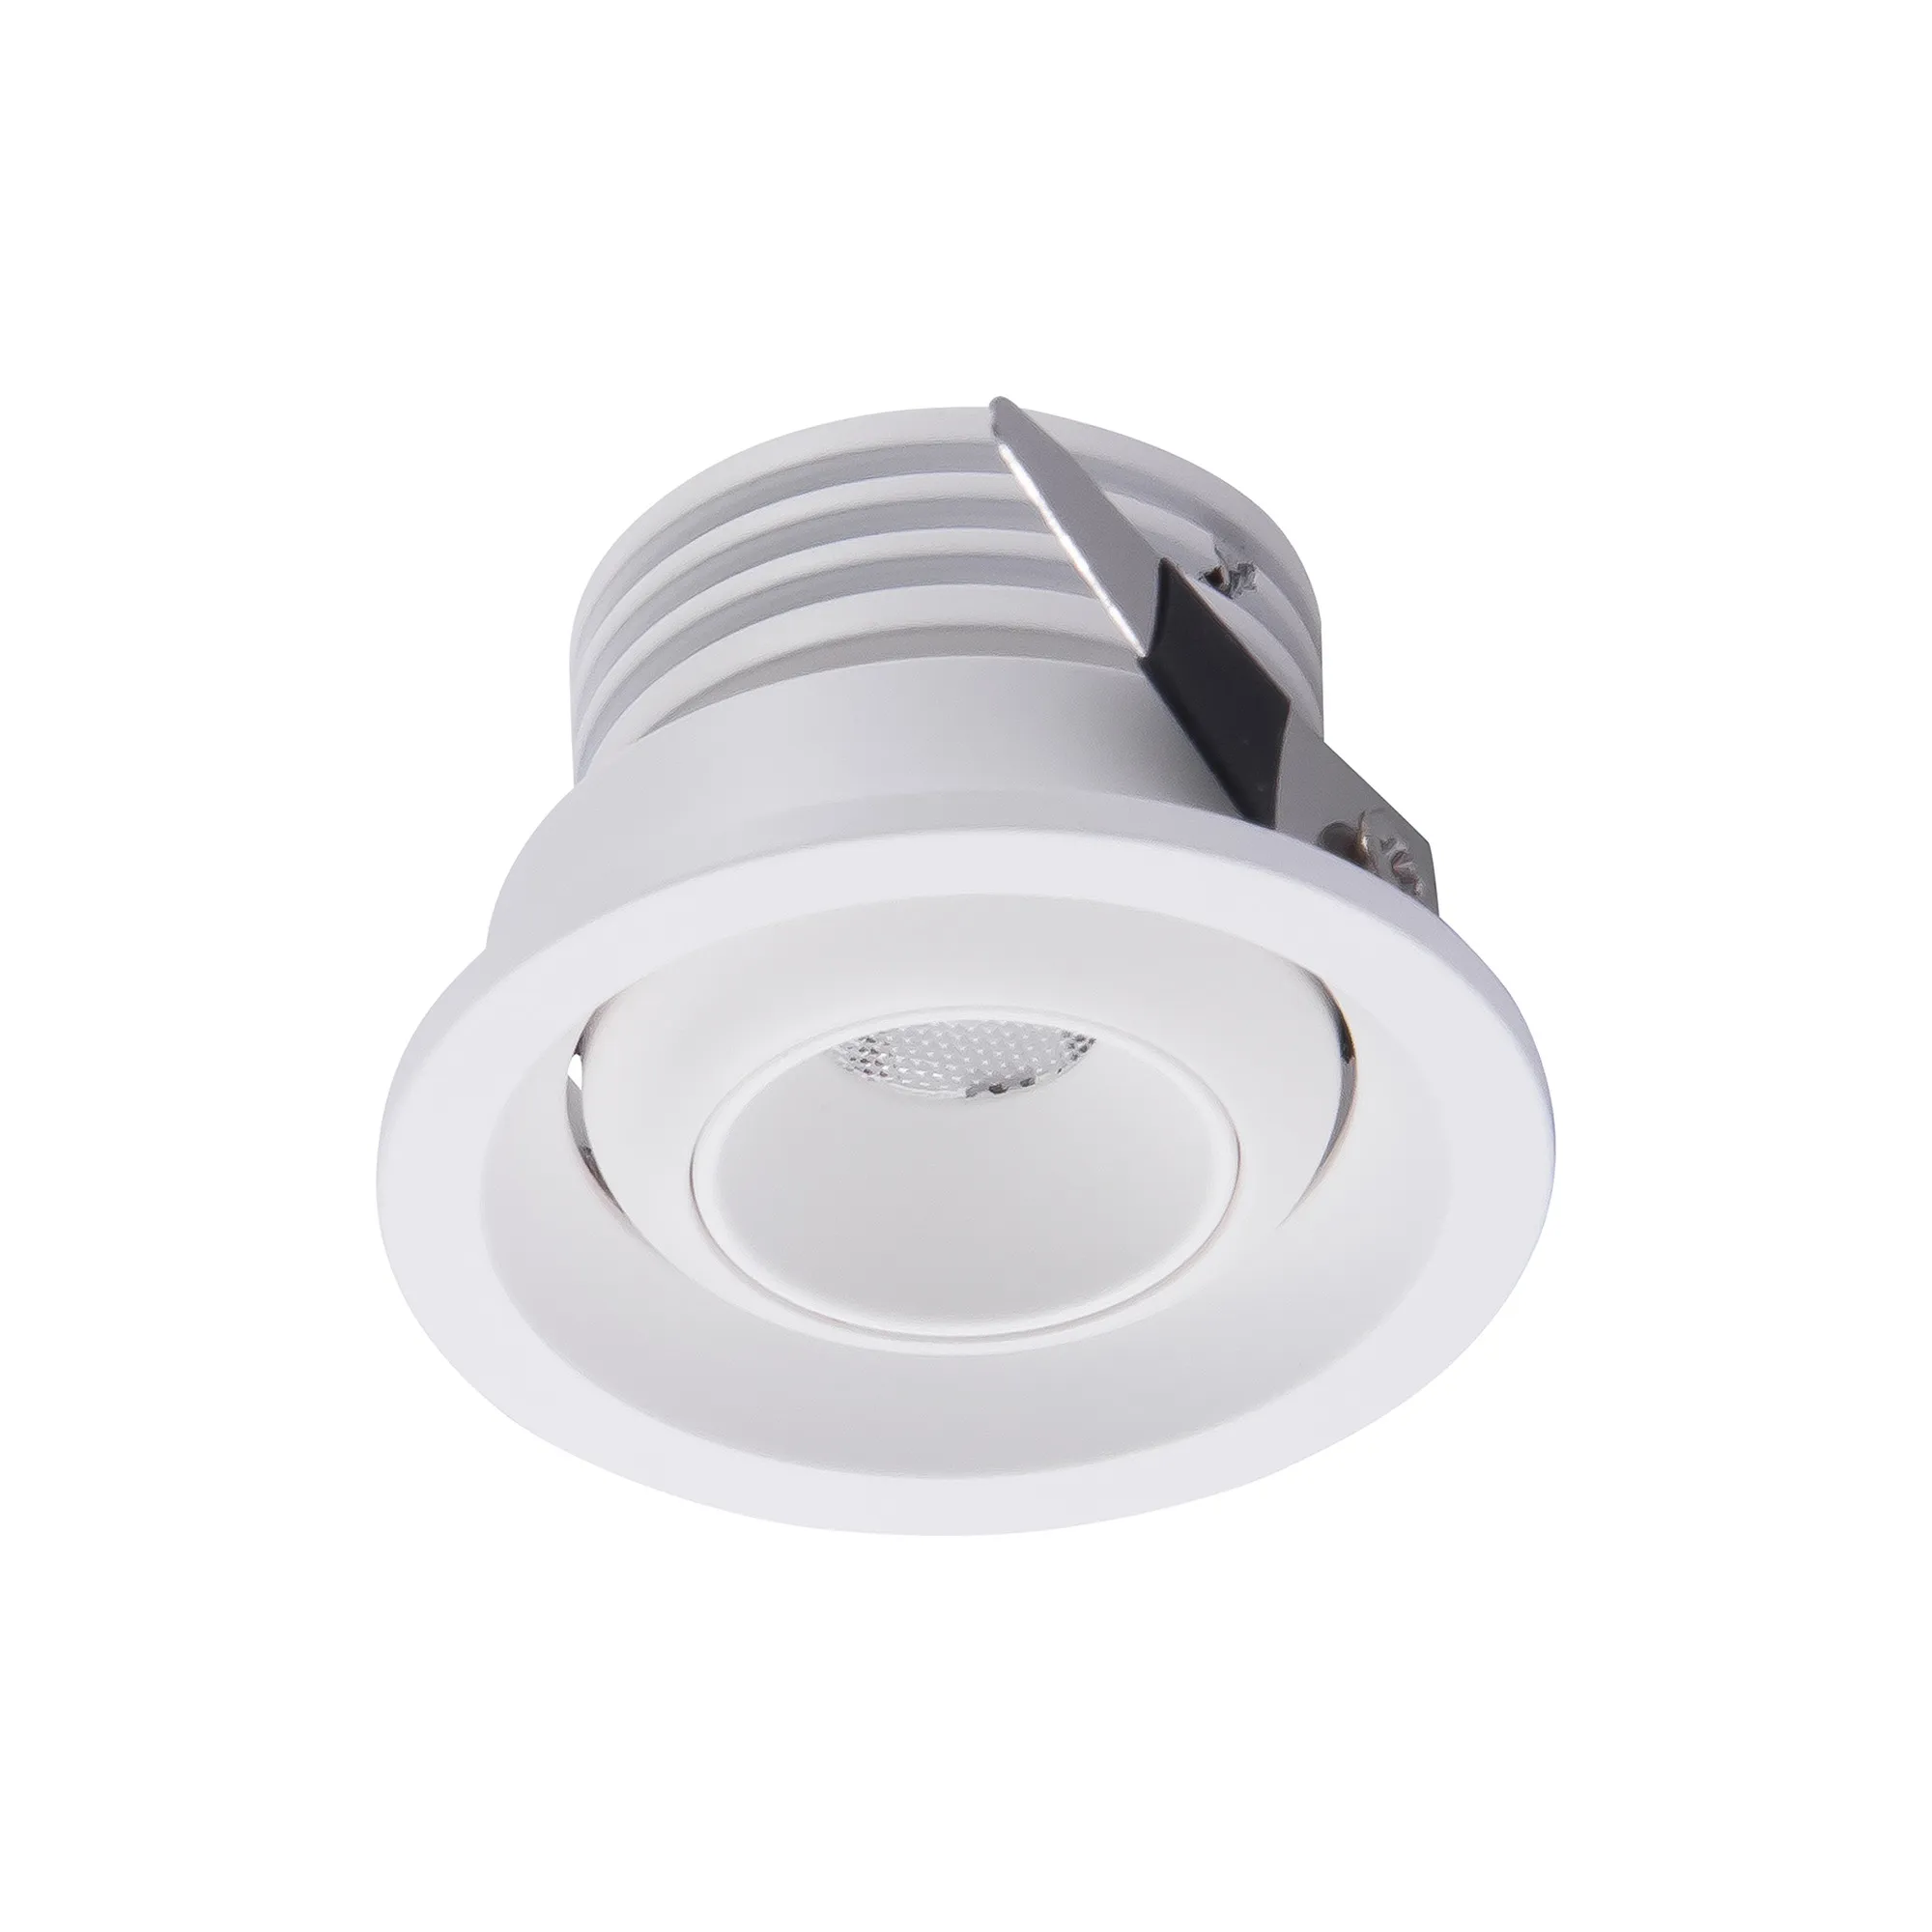 Neptuno Ceiling Lights Mantra Fusion Recessed Lights